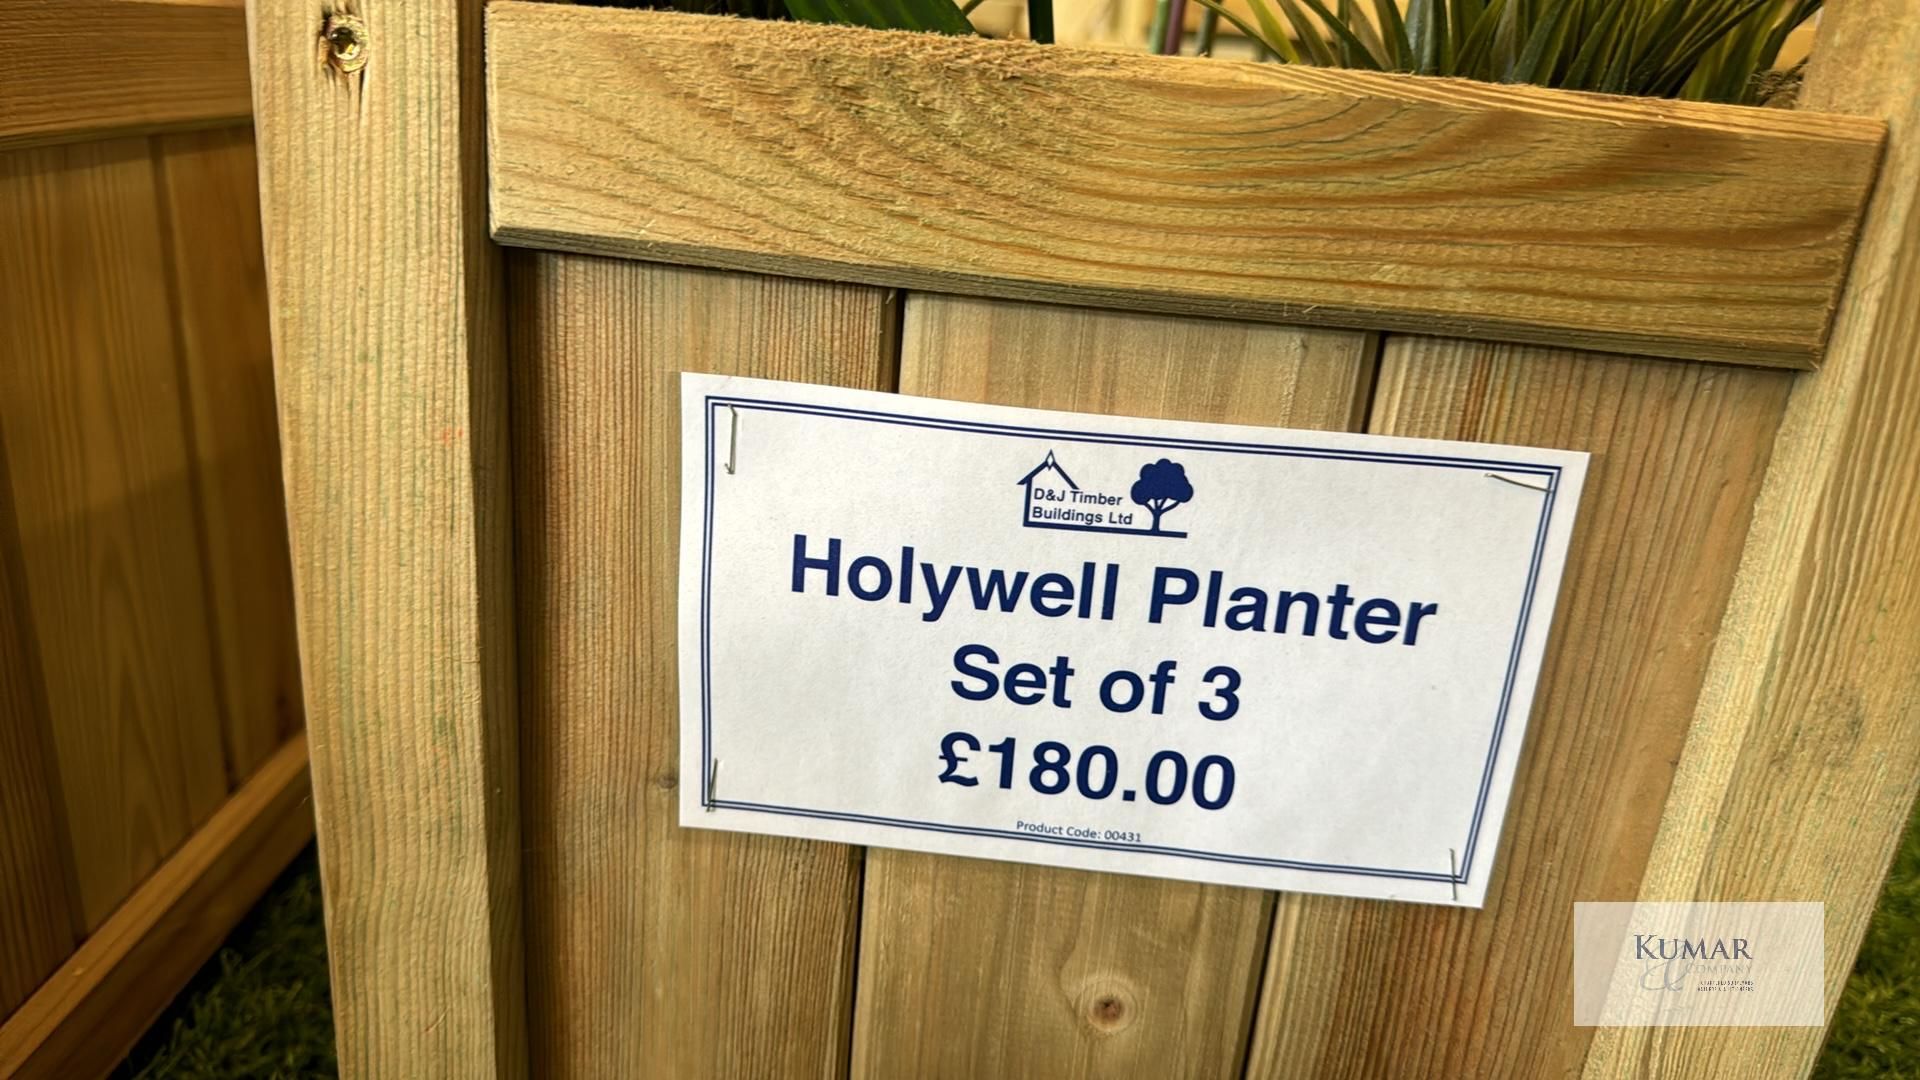 Holywell Planter Set of 3 to include Trees & Flowers As Shown RRP £180 - Image 4 of 4